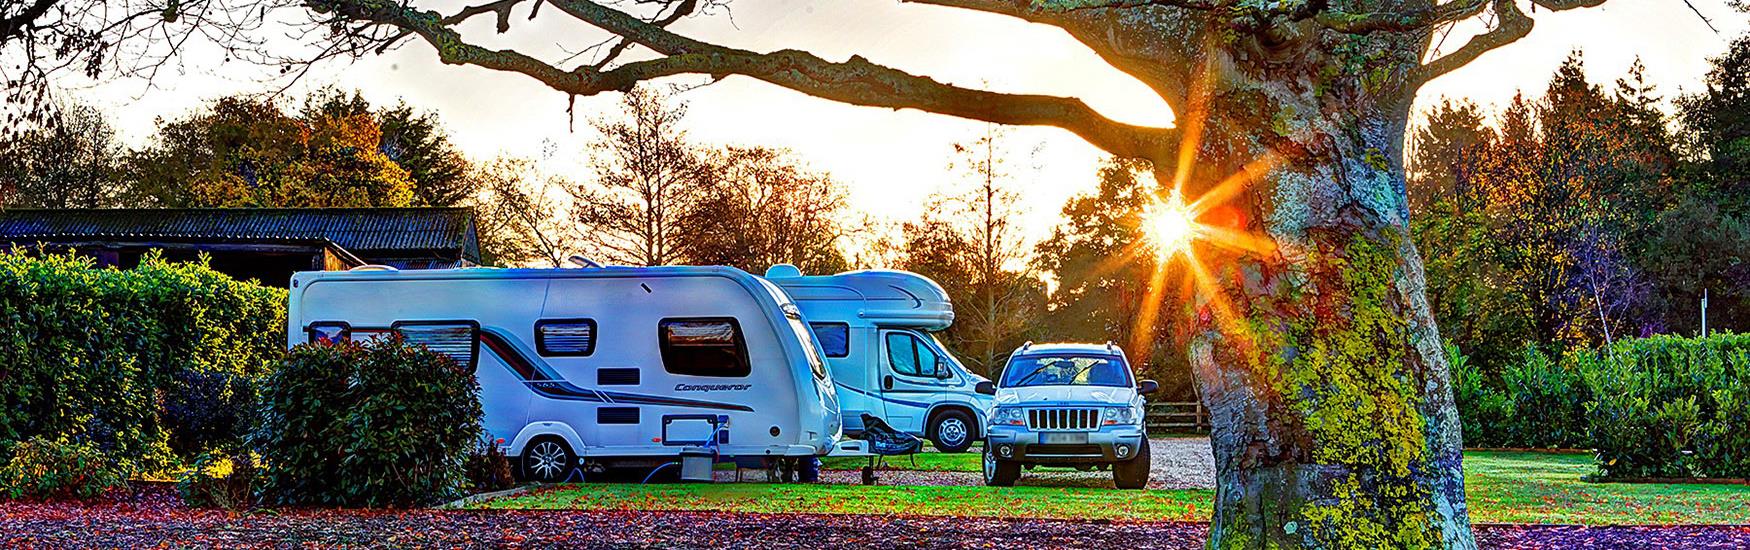 Caravans lined up in parked with the sun setting behind the trees